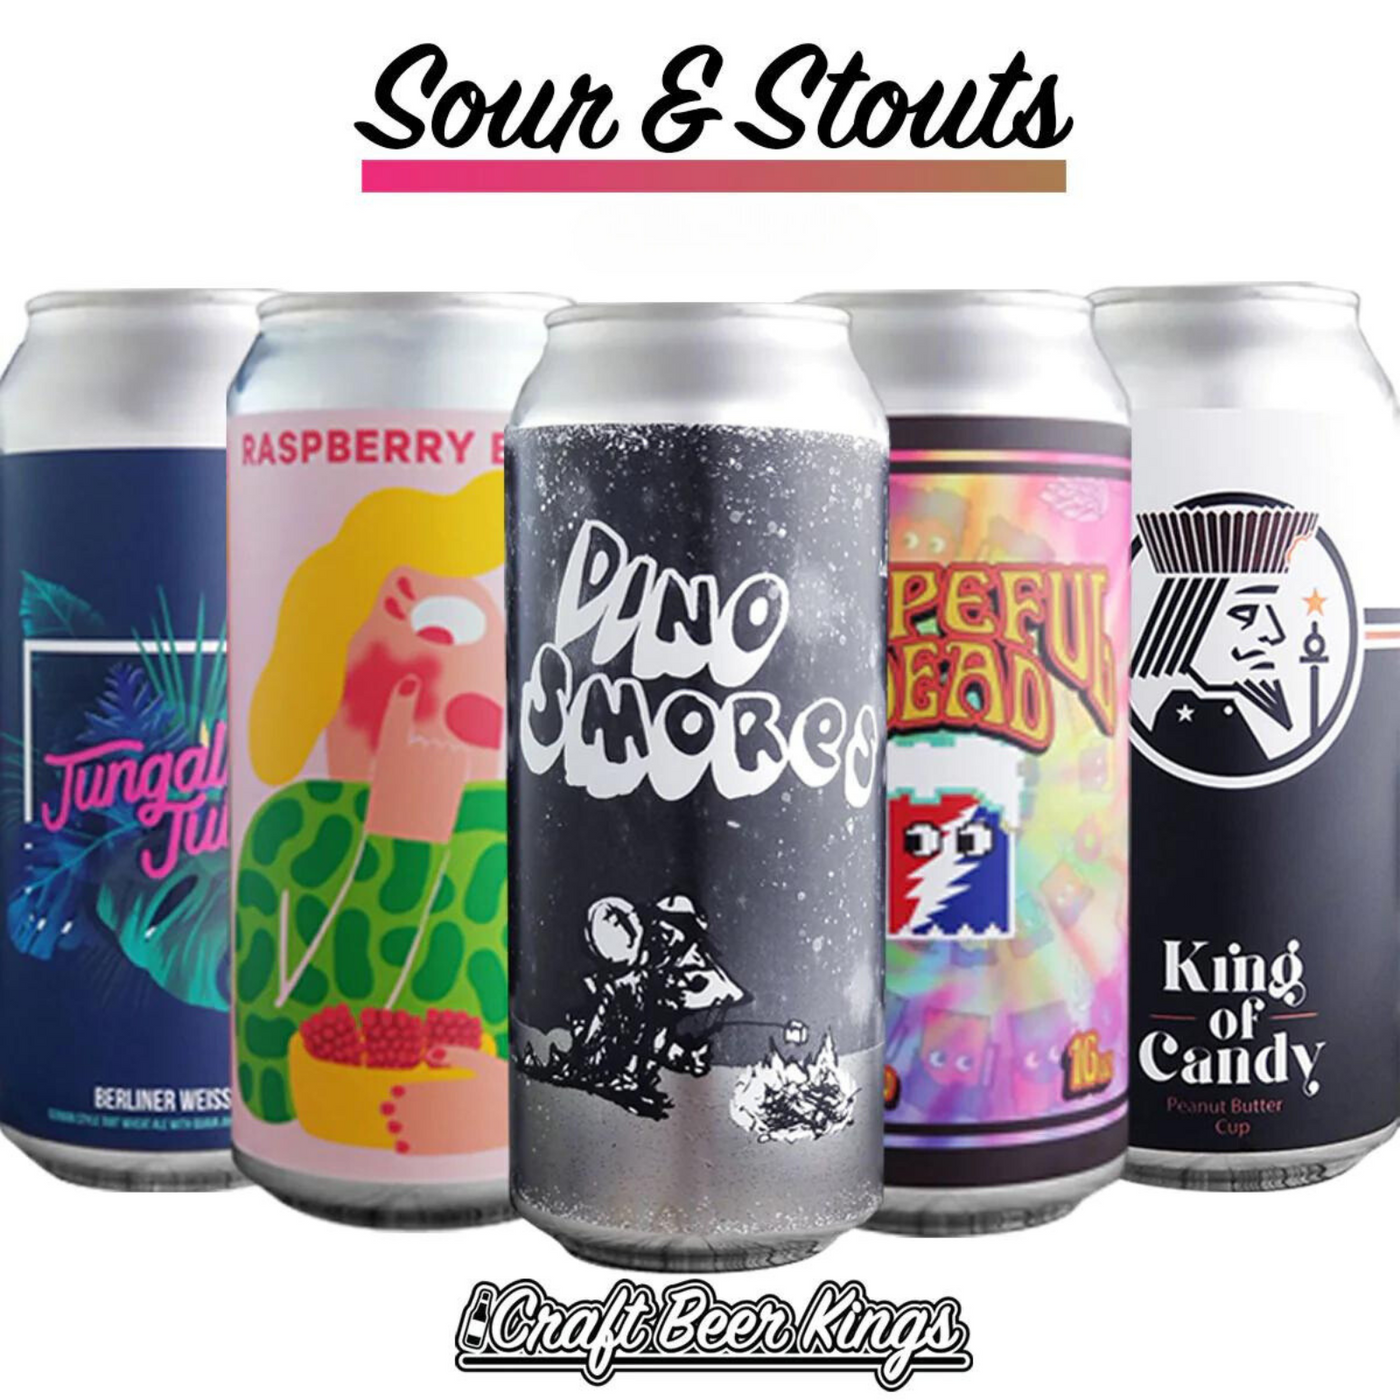 Stouts & Sours (Shipping Included)